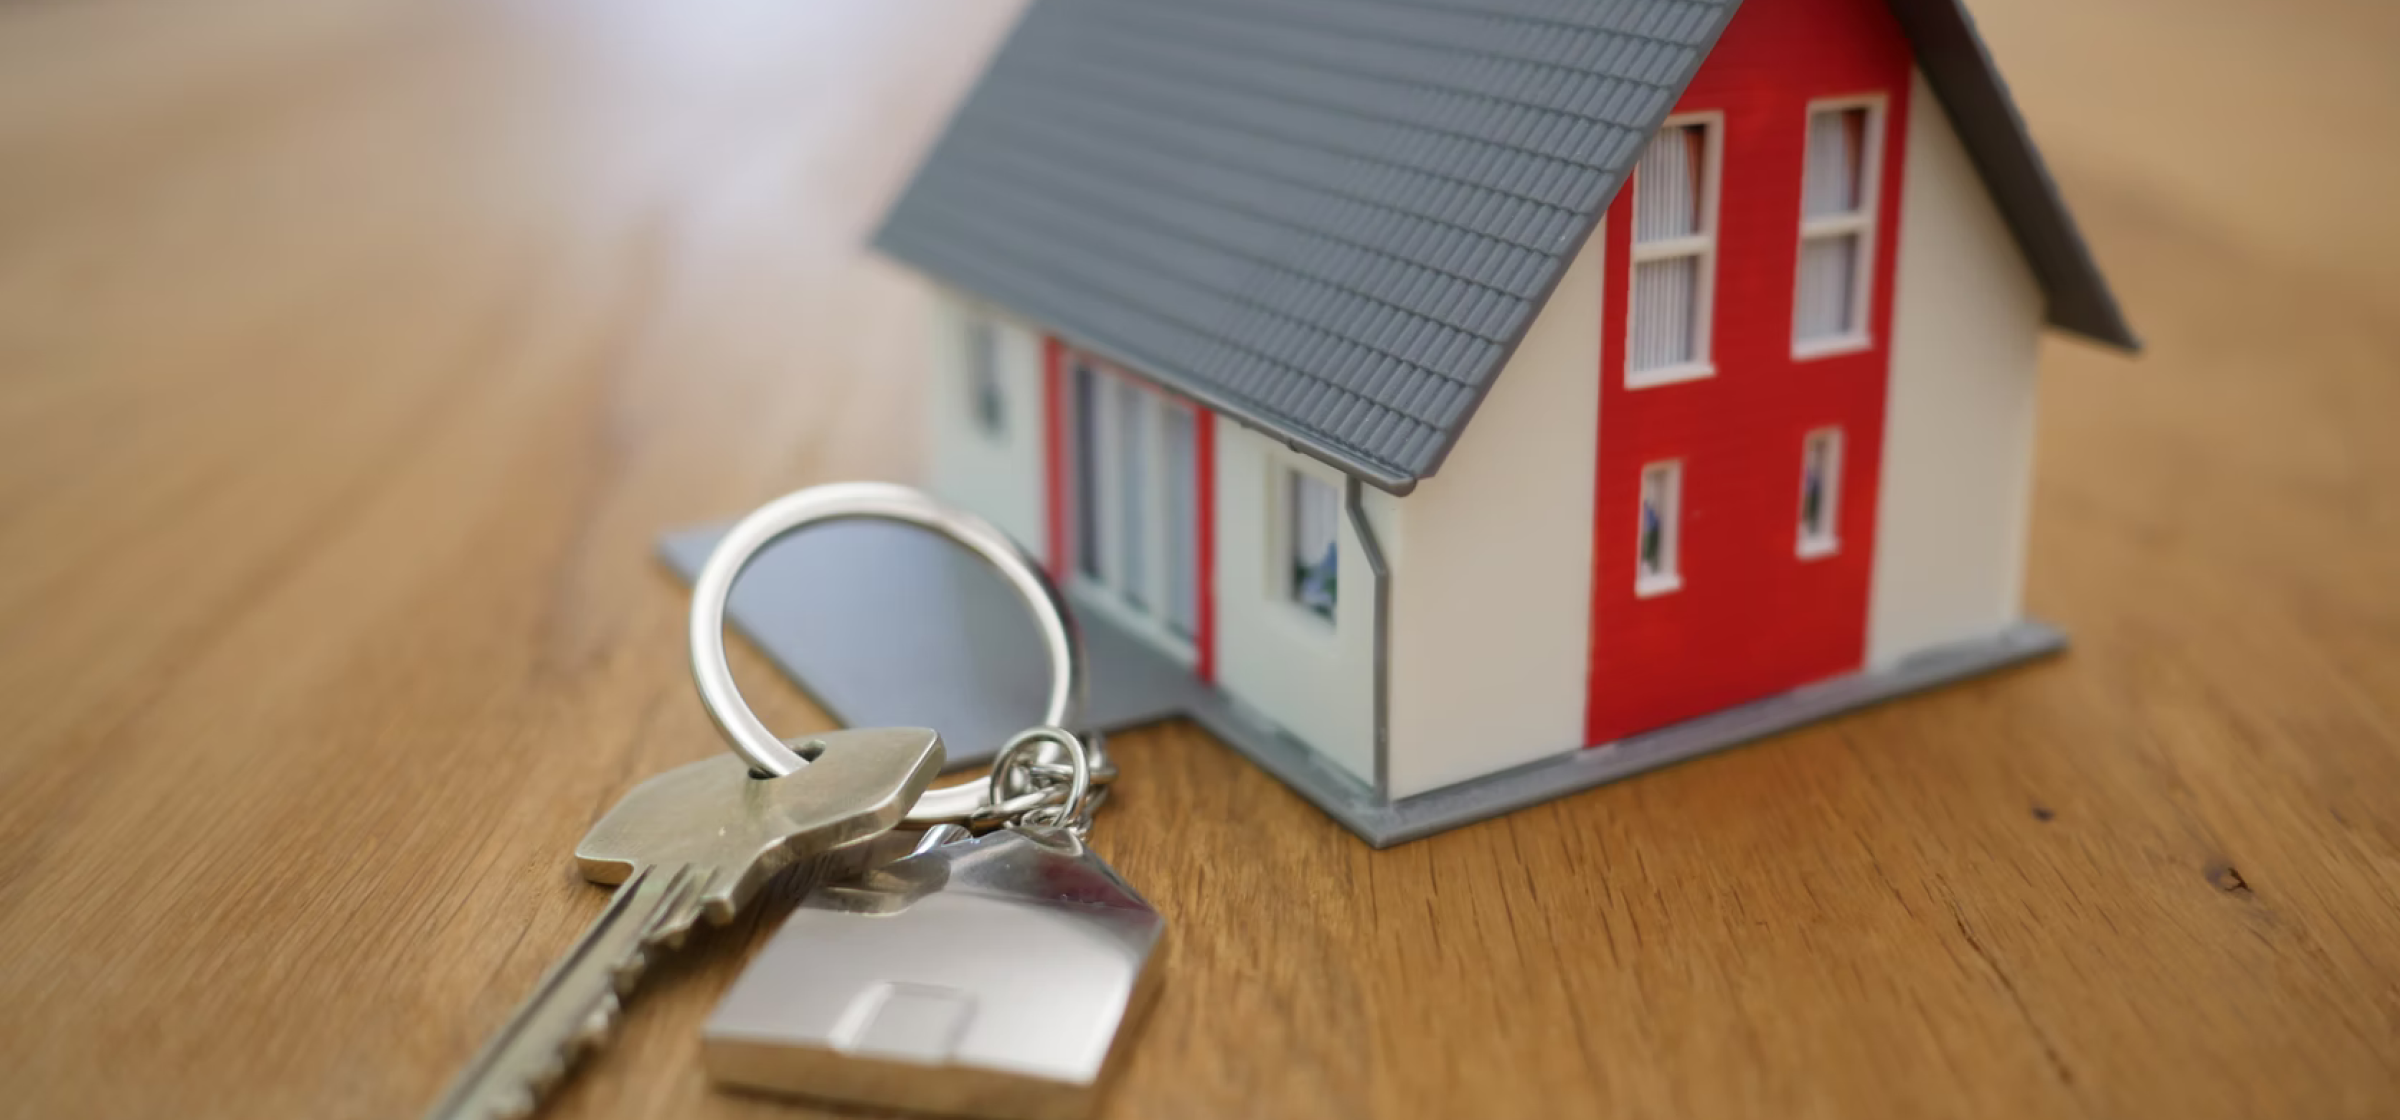 Five Key Steps for First-Time Home Buyers When Interest Rates Are High